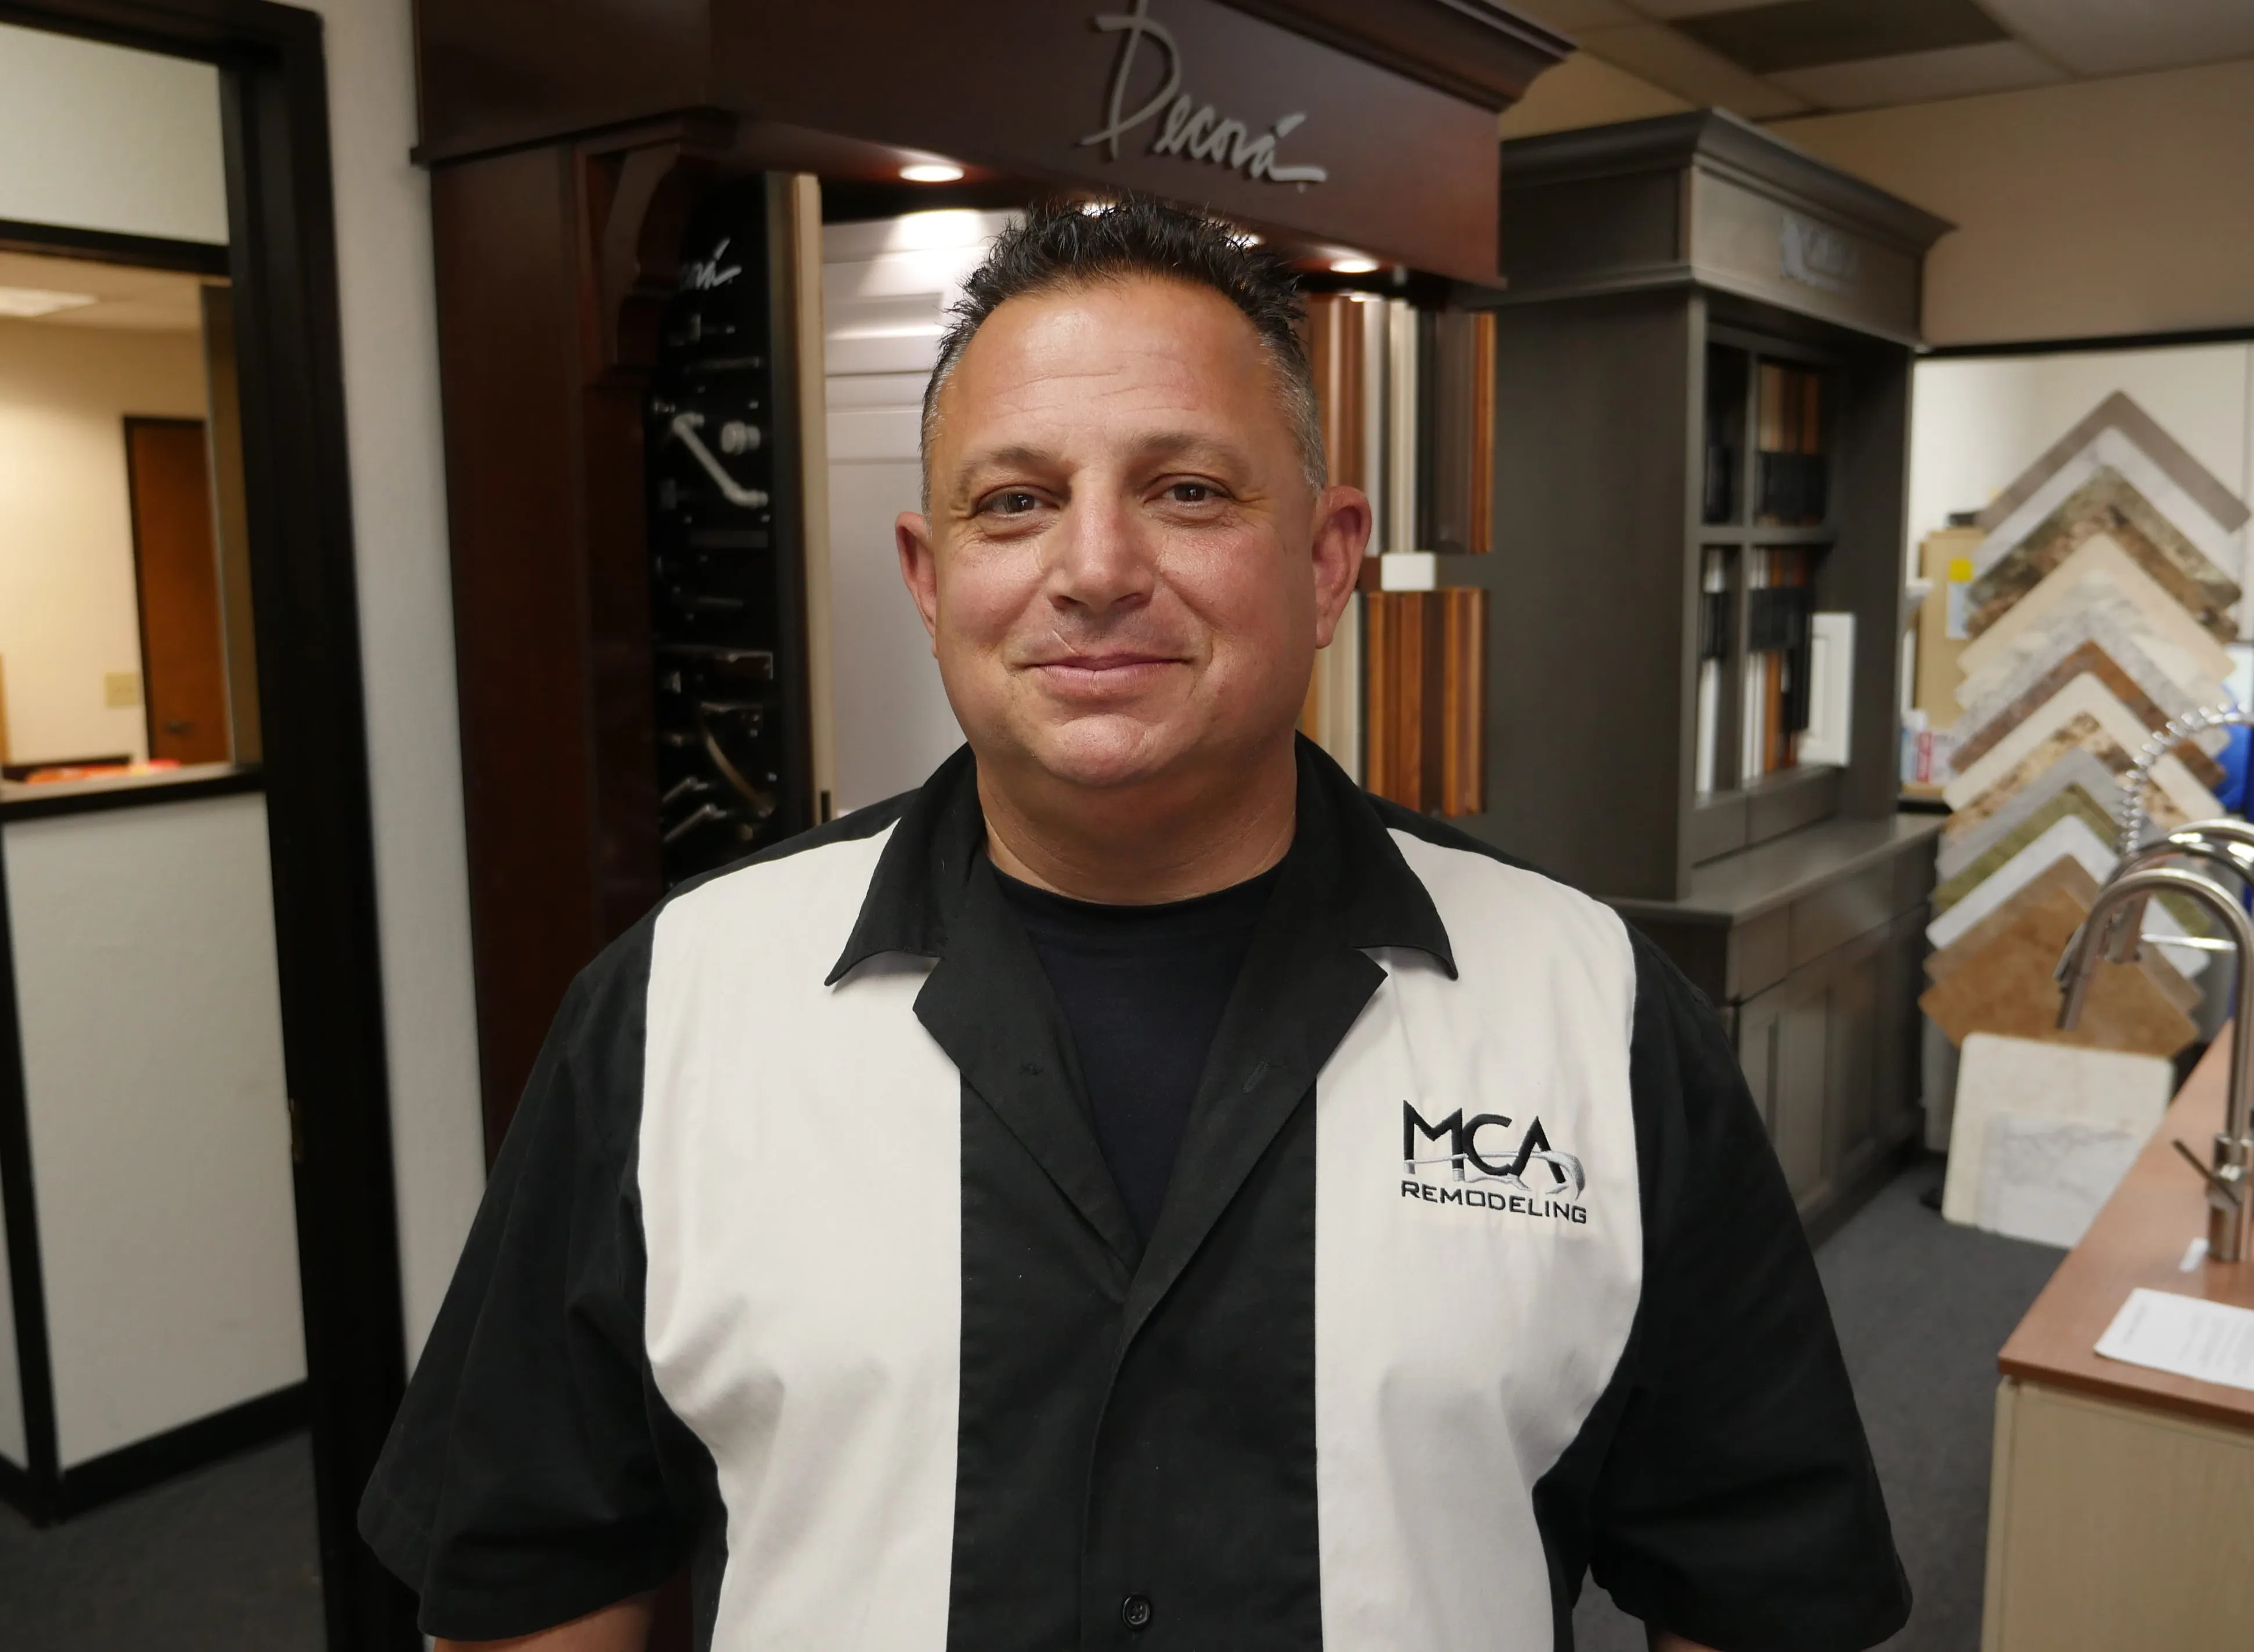 Mitch Alves is owner of MCA Remodeling Inc., a Diamond Certified company. He can be reached at (650) 273-5399 or by email.